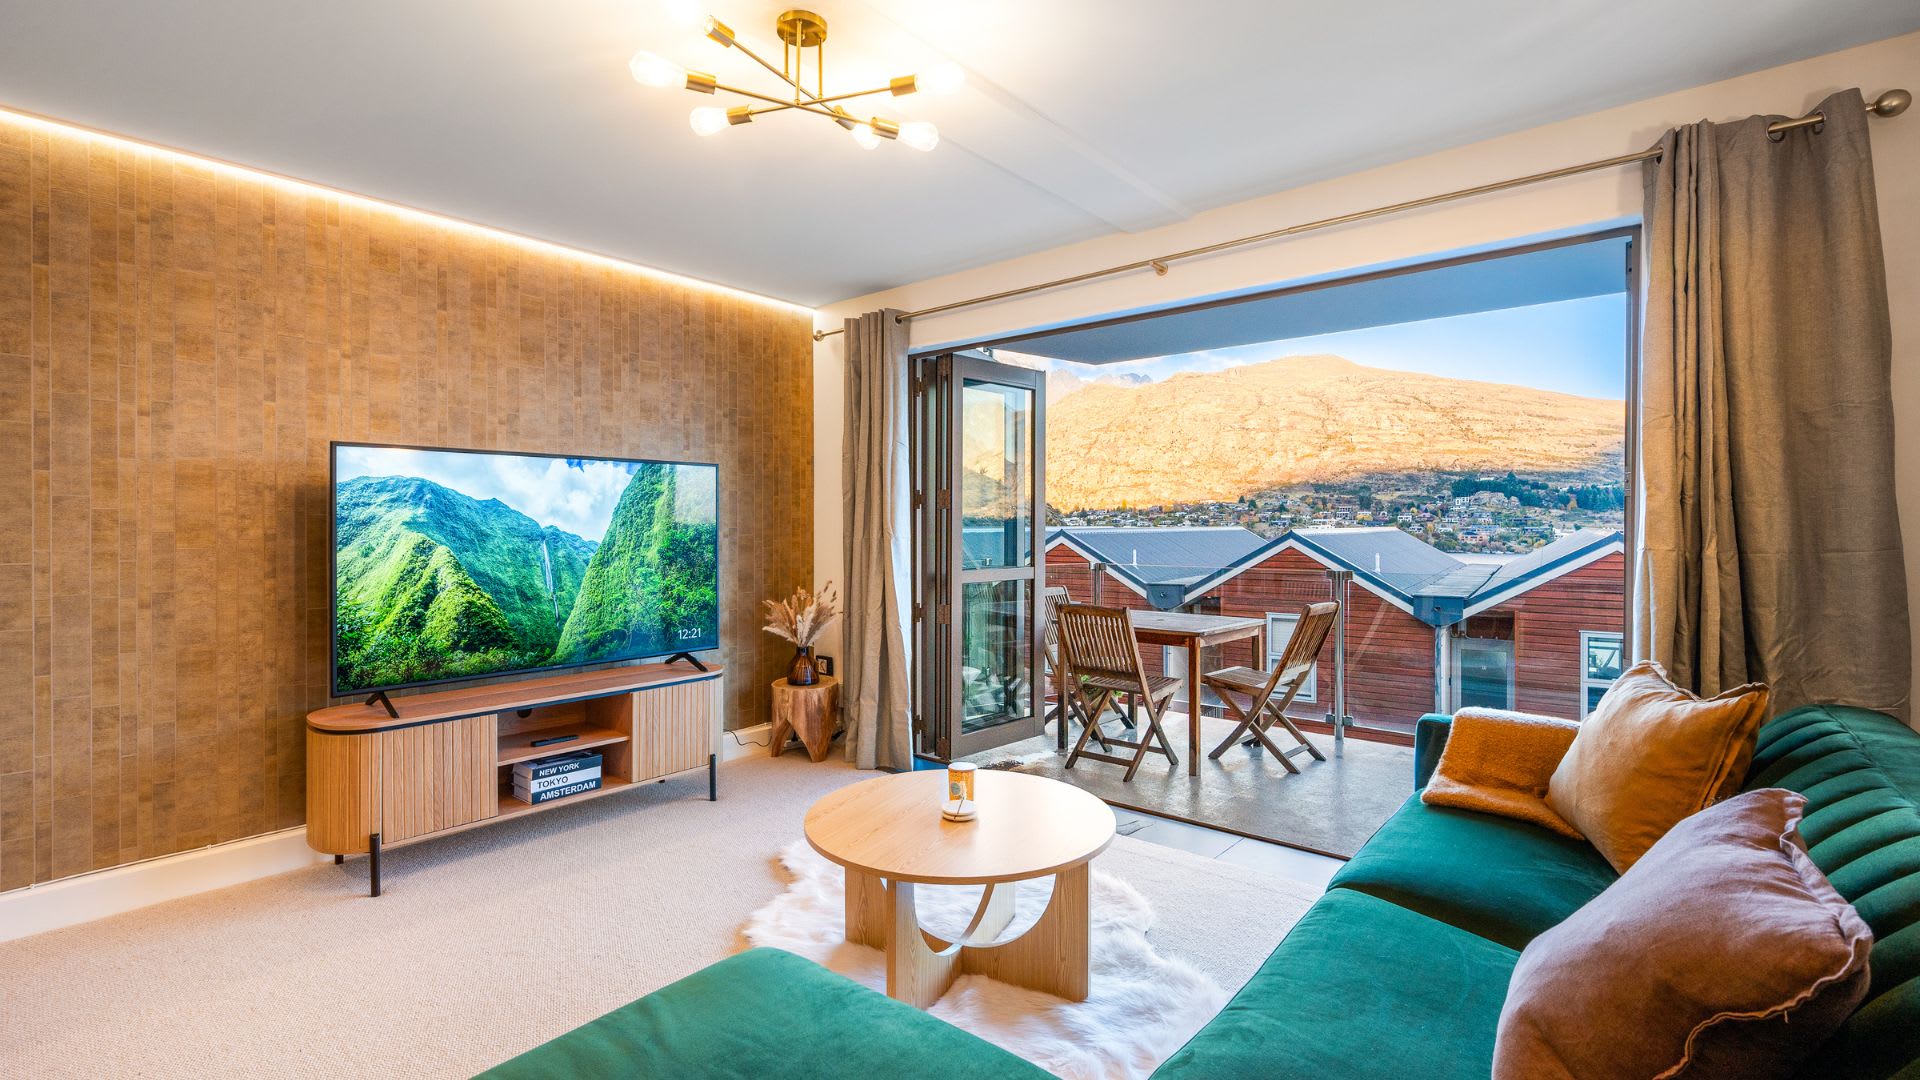 Enjoy a cozy and bright interior in our Queenstown 2-bedroom accommodation